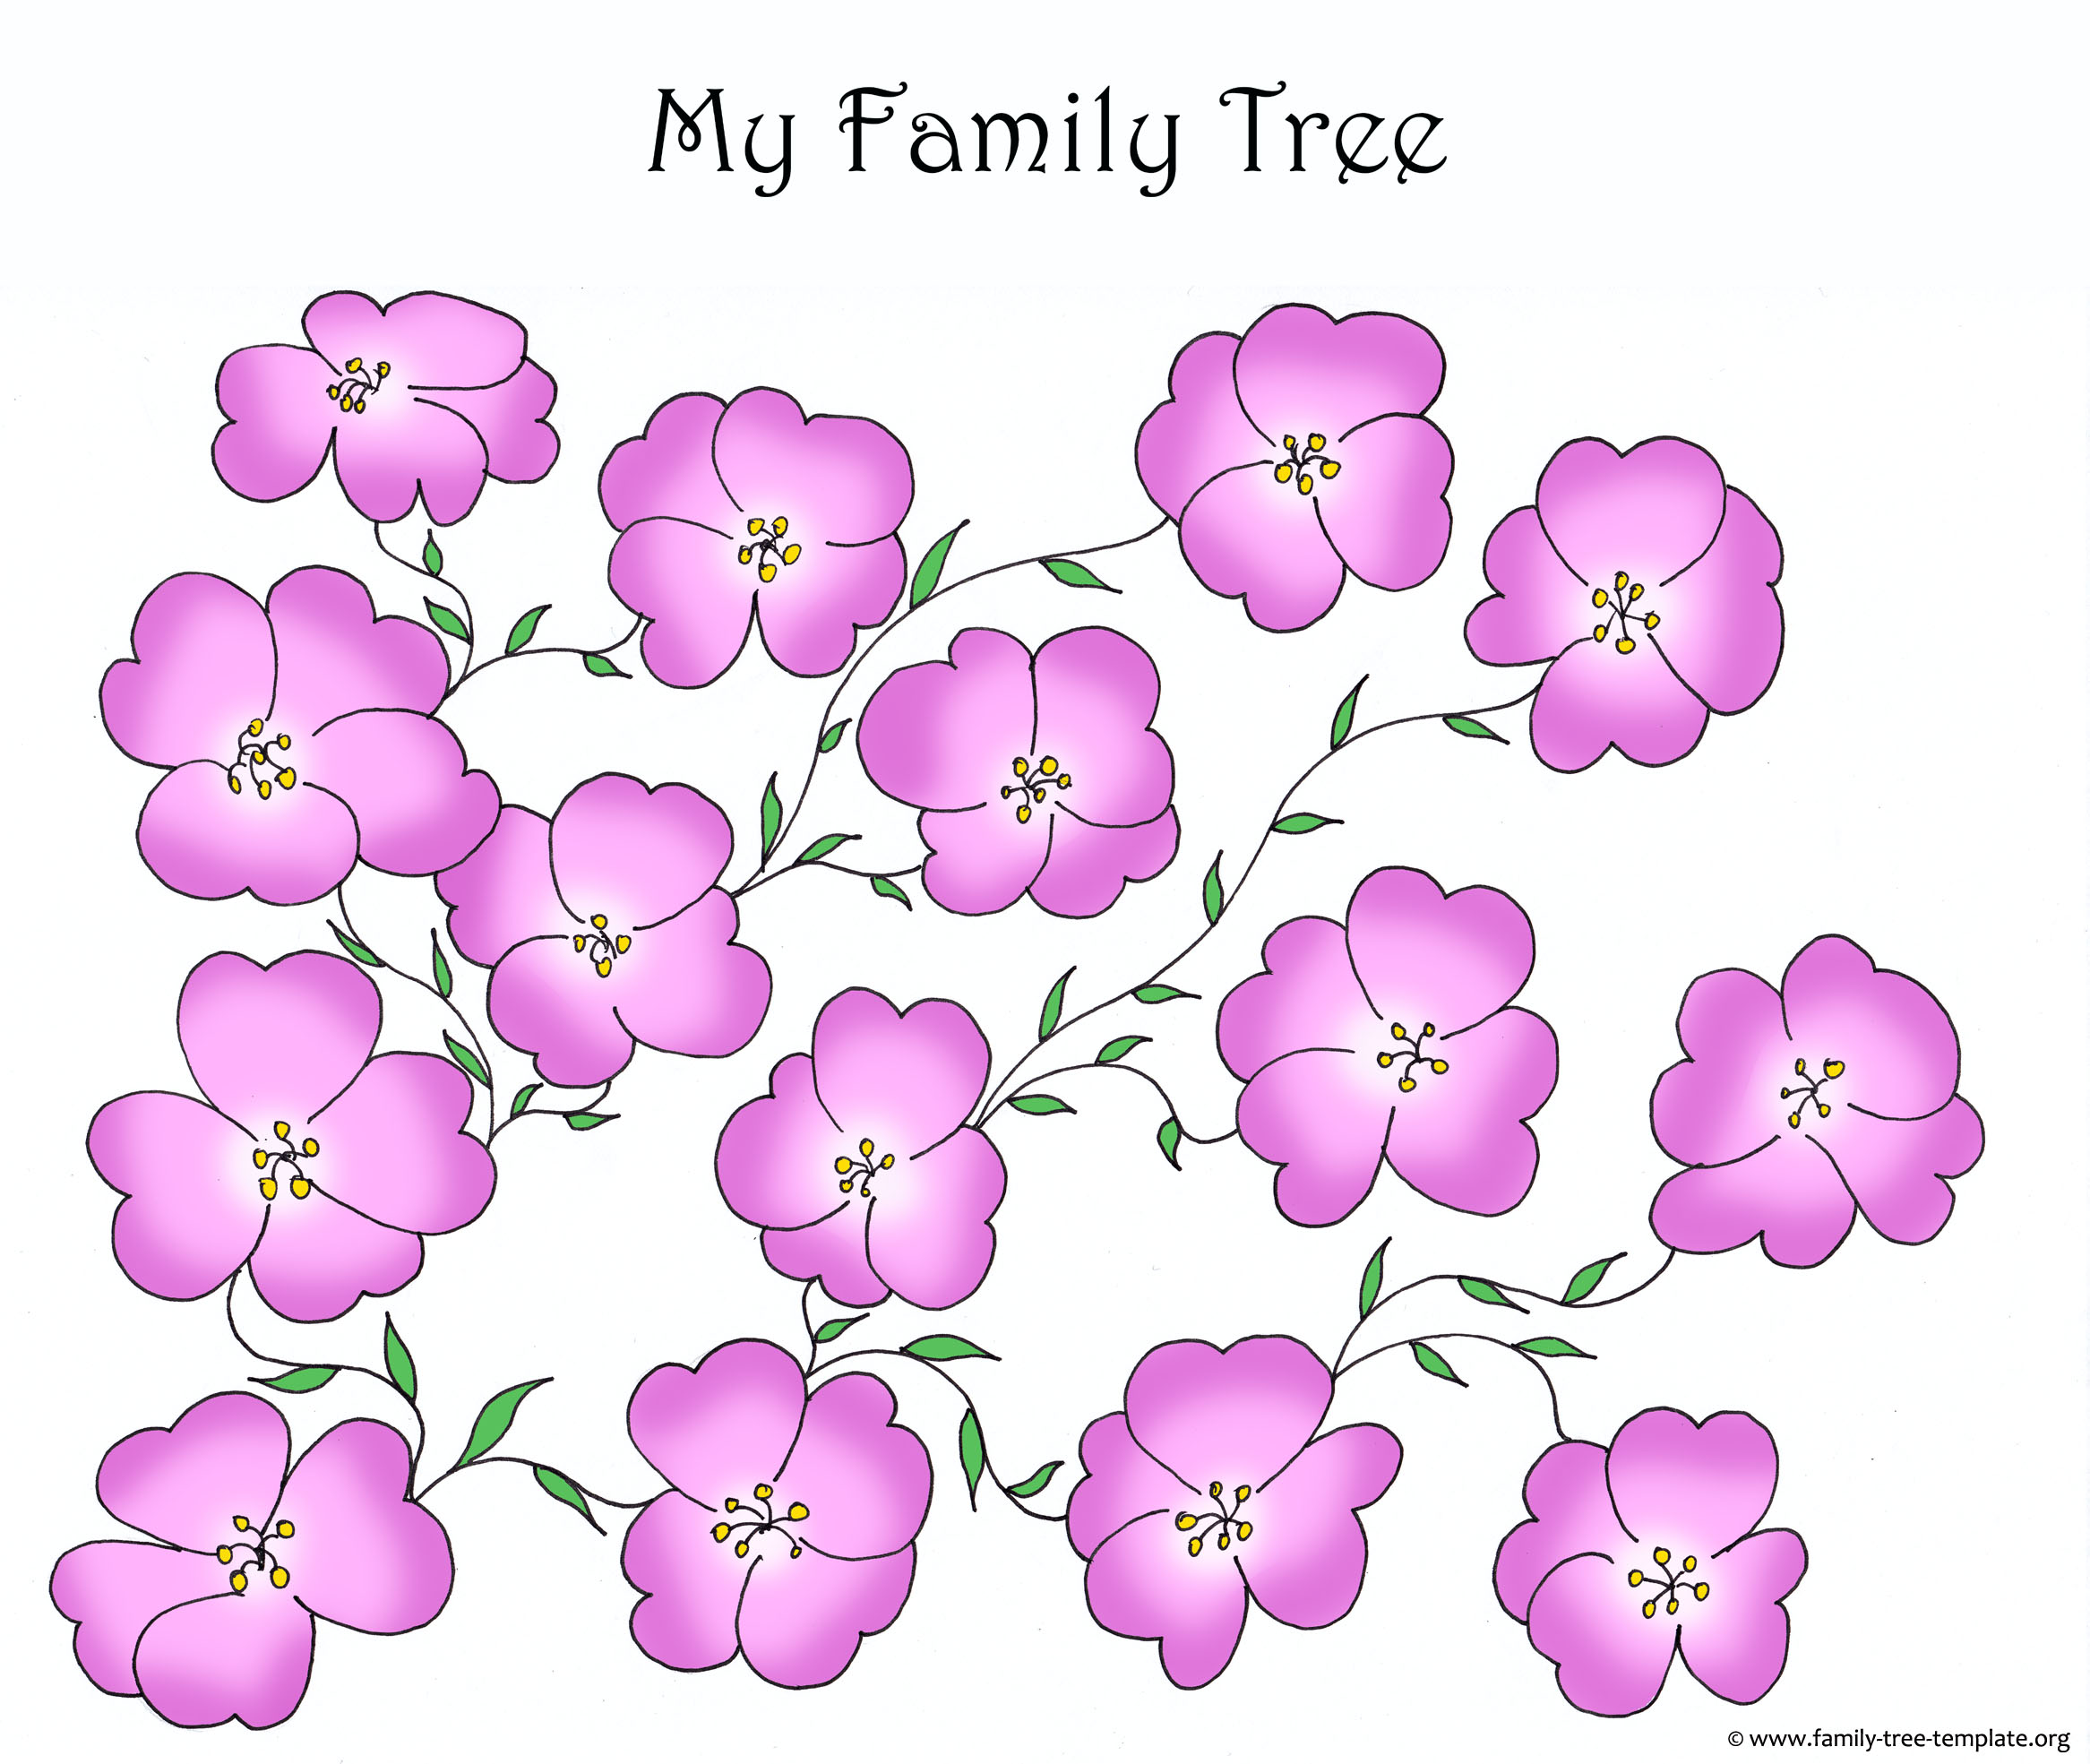 Family tree form with pink flowers.